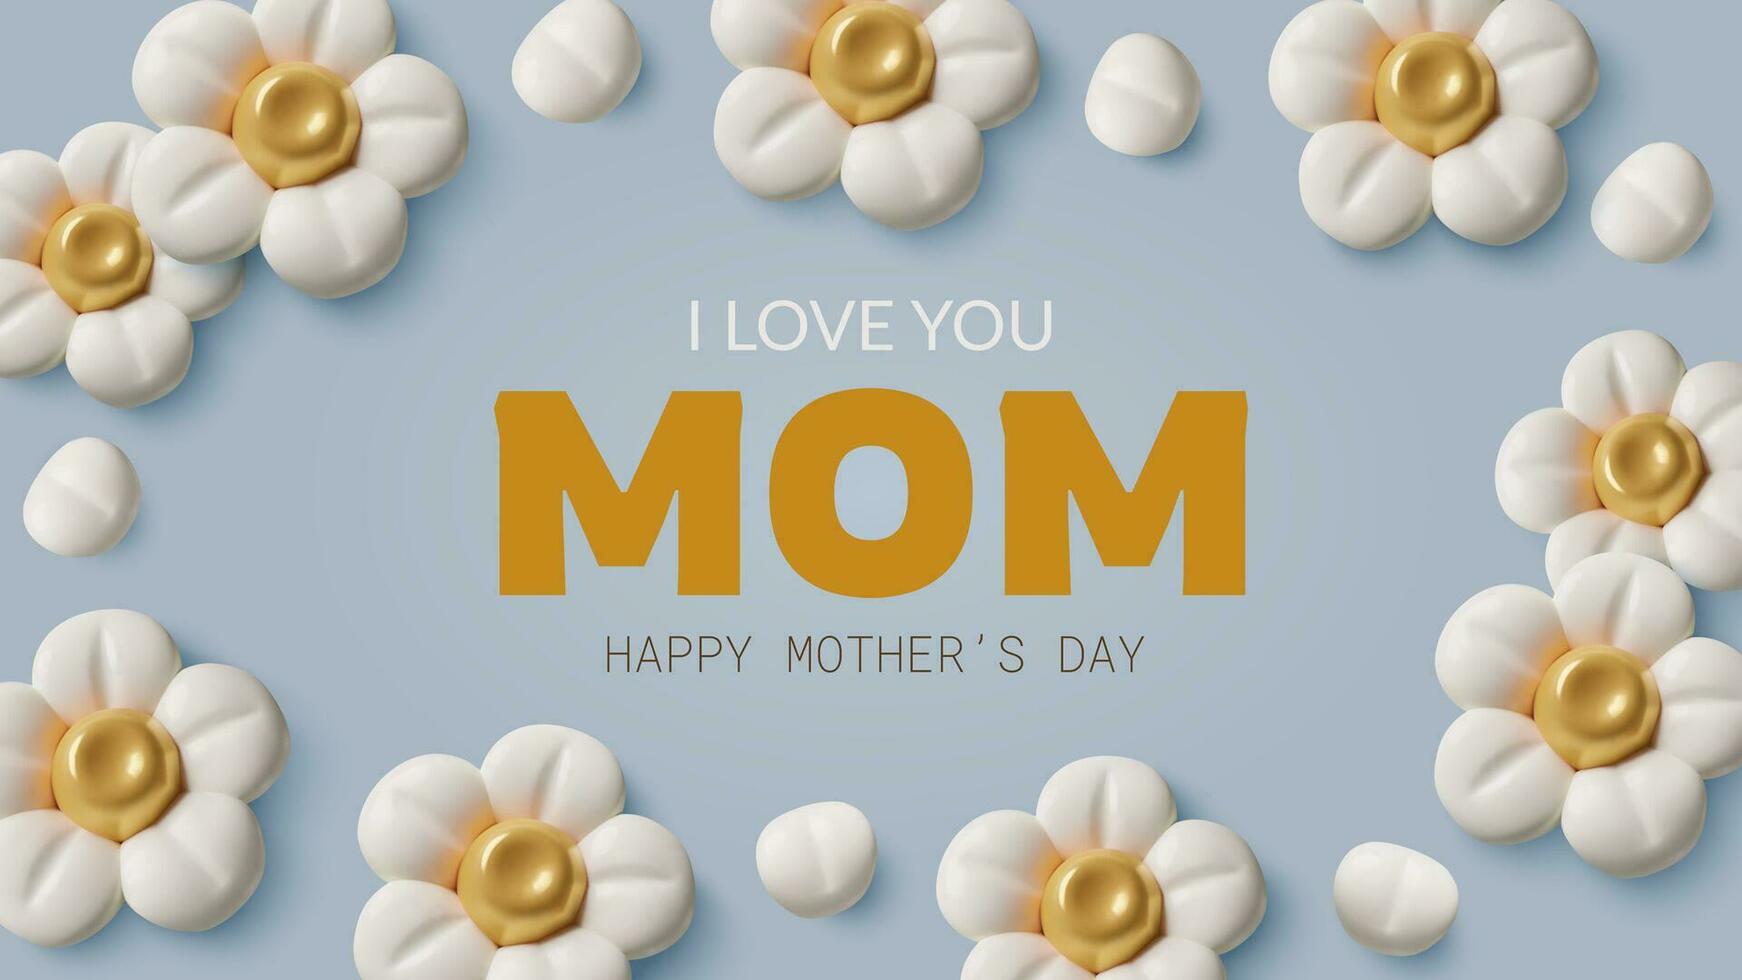 3D flower background for Mother's Day White floral frame on blue background with I love you mom text vector